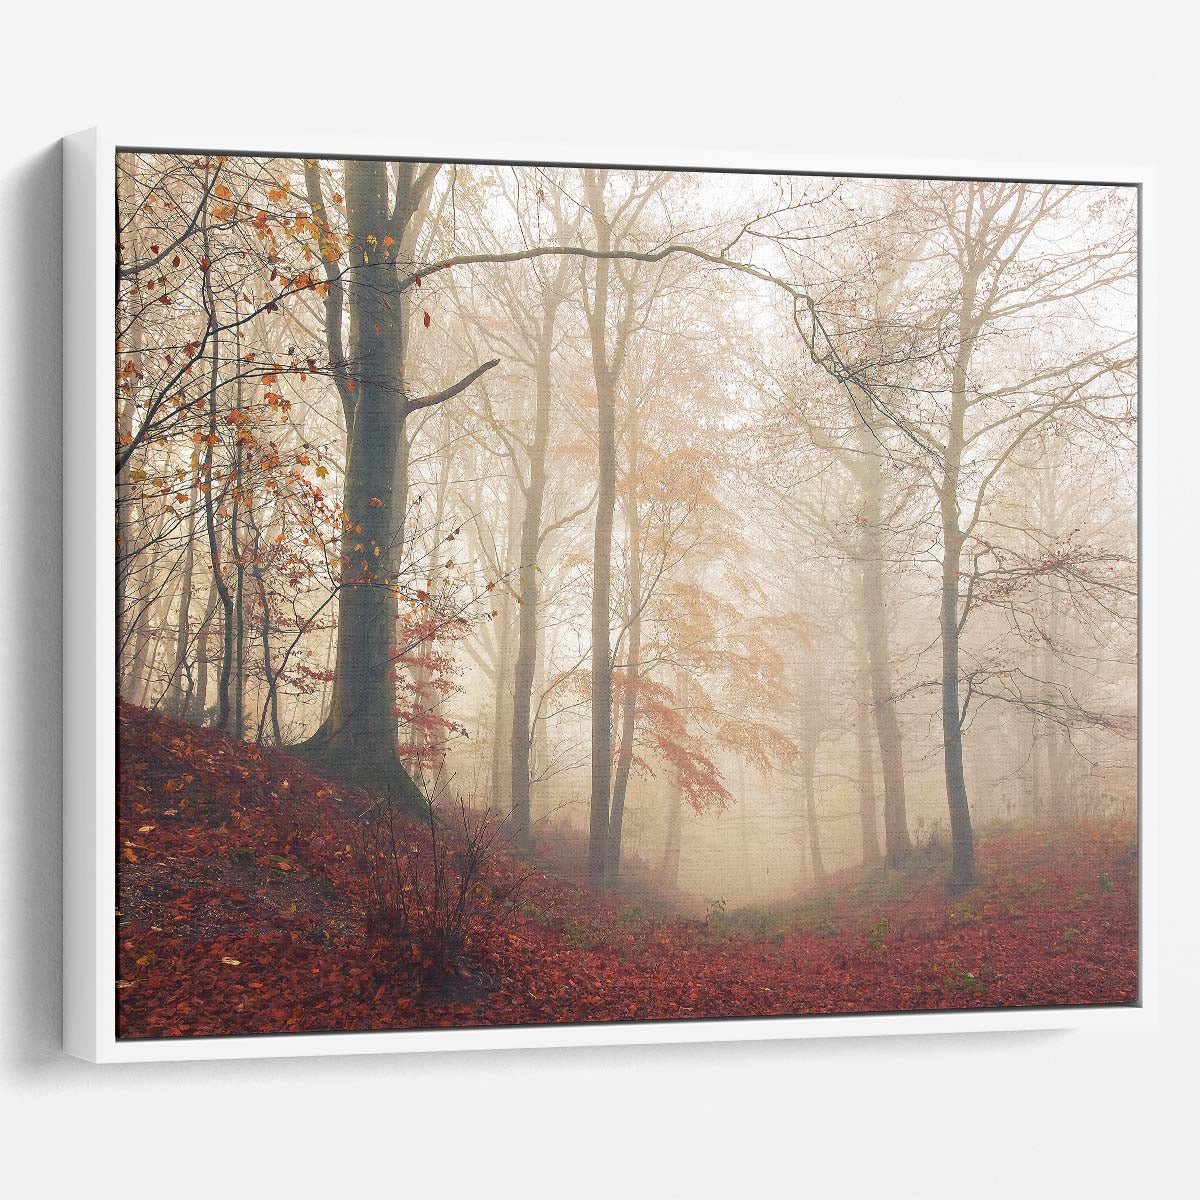 Autumnal Mist & Red Woods Forest Landscape Wall Art by Luxuriance Designs. Made in USA.